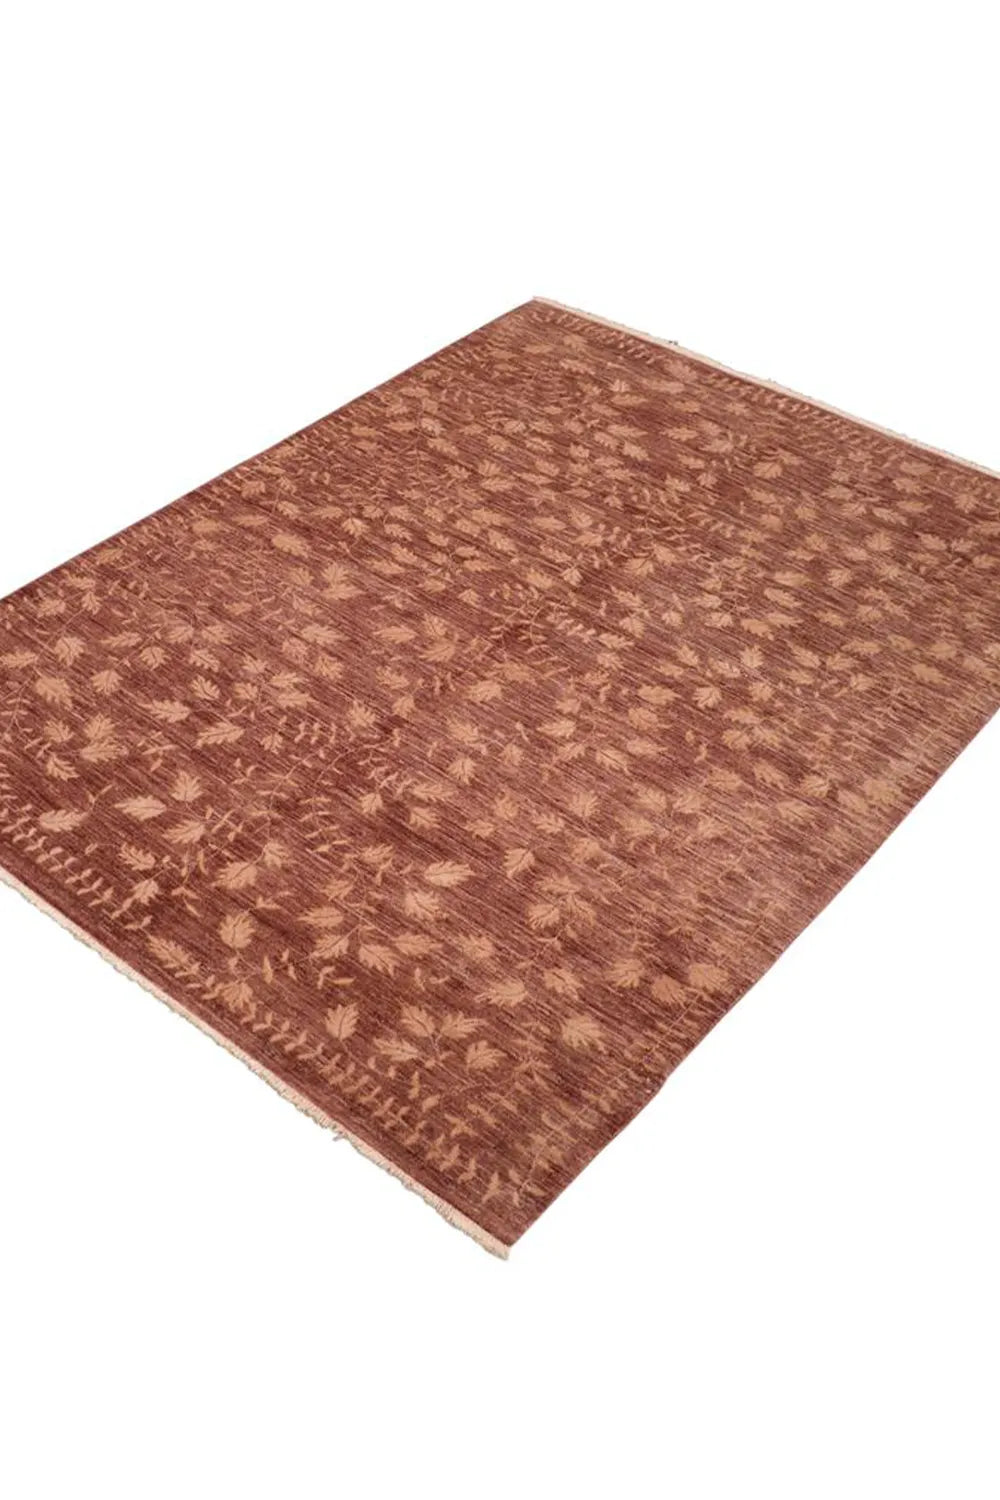 Natural brown wool rug with a classic pattern, blending luxury with comfort.